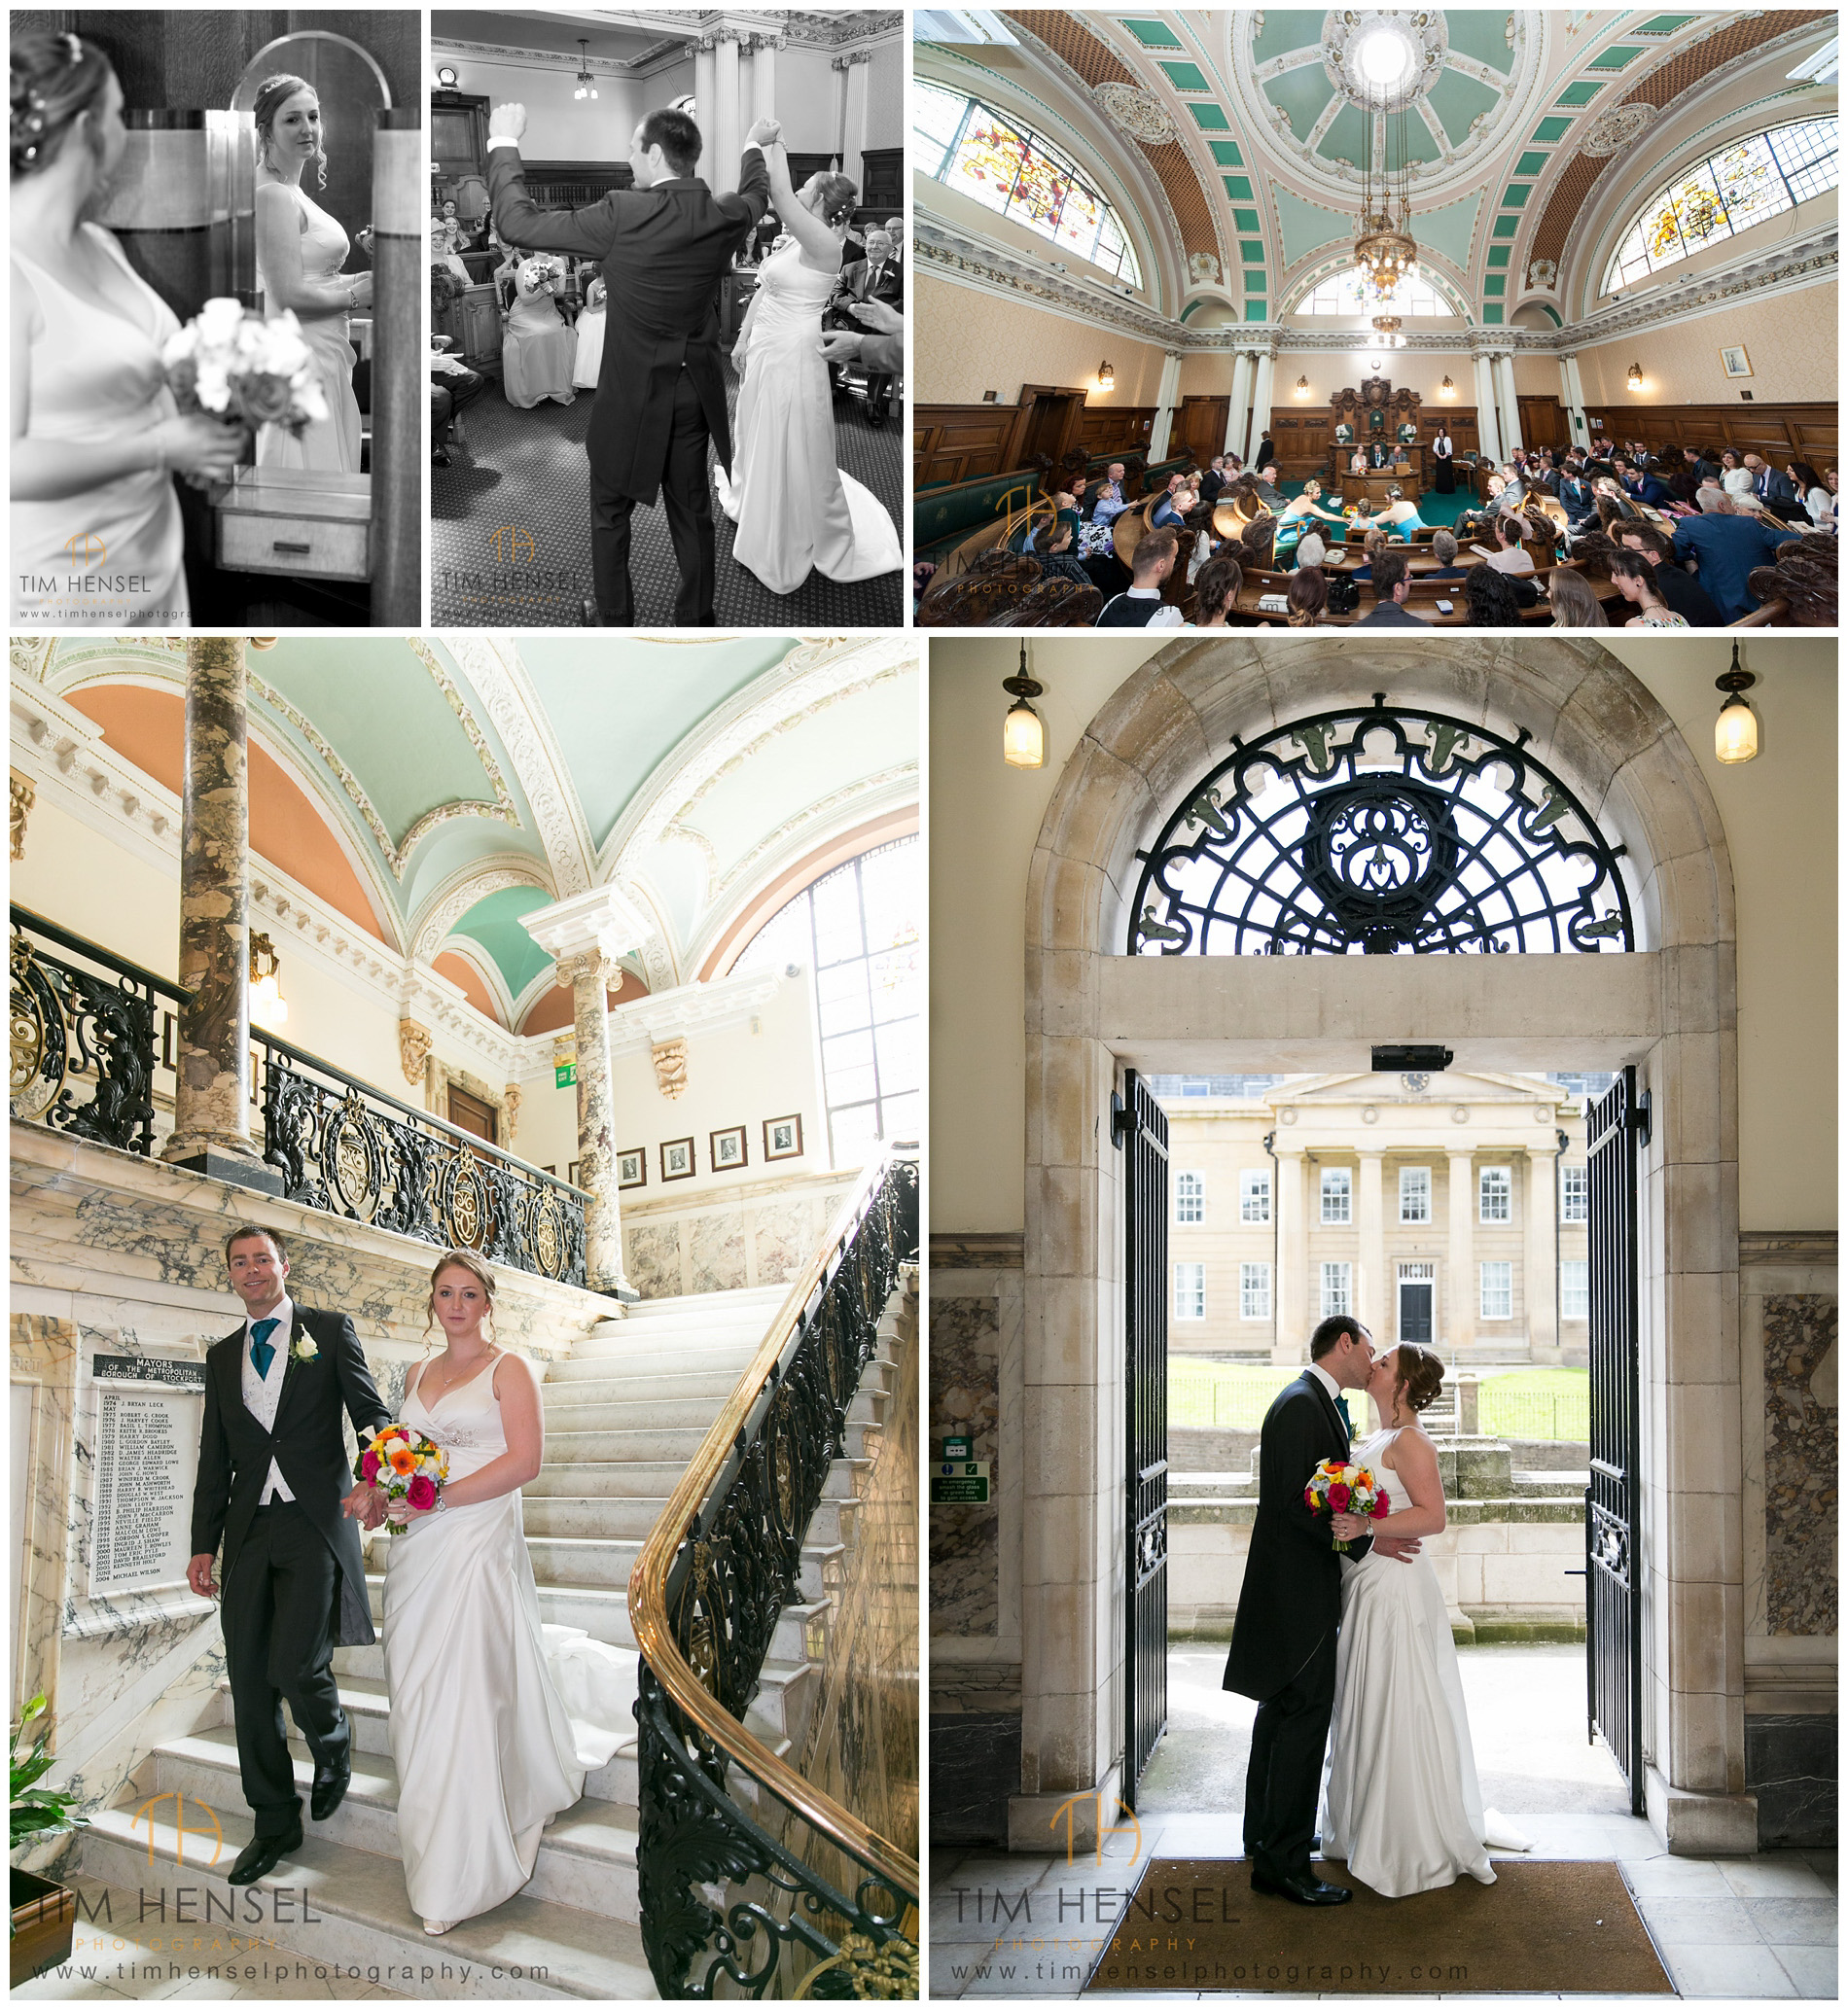 Wedding photography at Stockport Town Hall